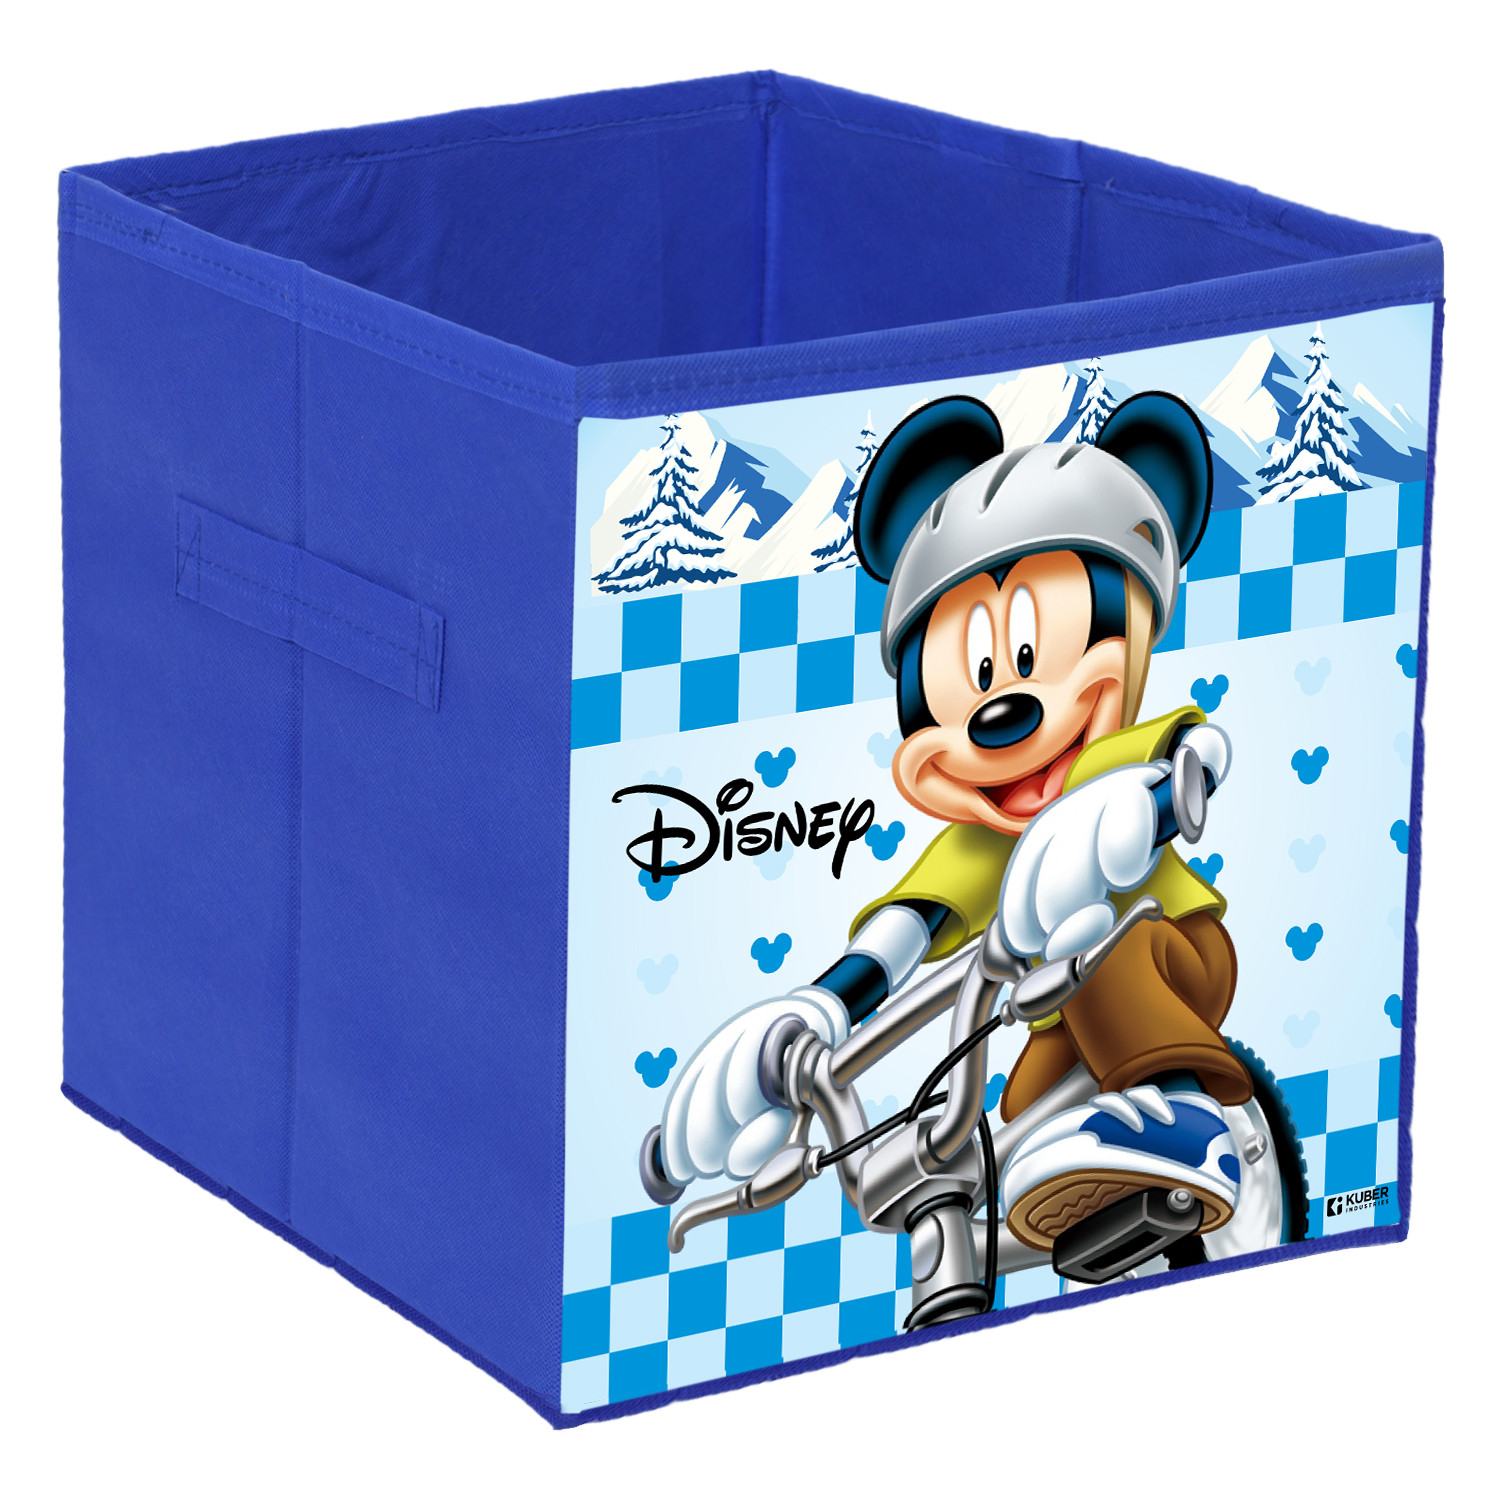 Kuber Industries Disney Mickey Print Durable & Collapsible Square Storage Box|Clothes Organizer With Handle,.(Blue)